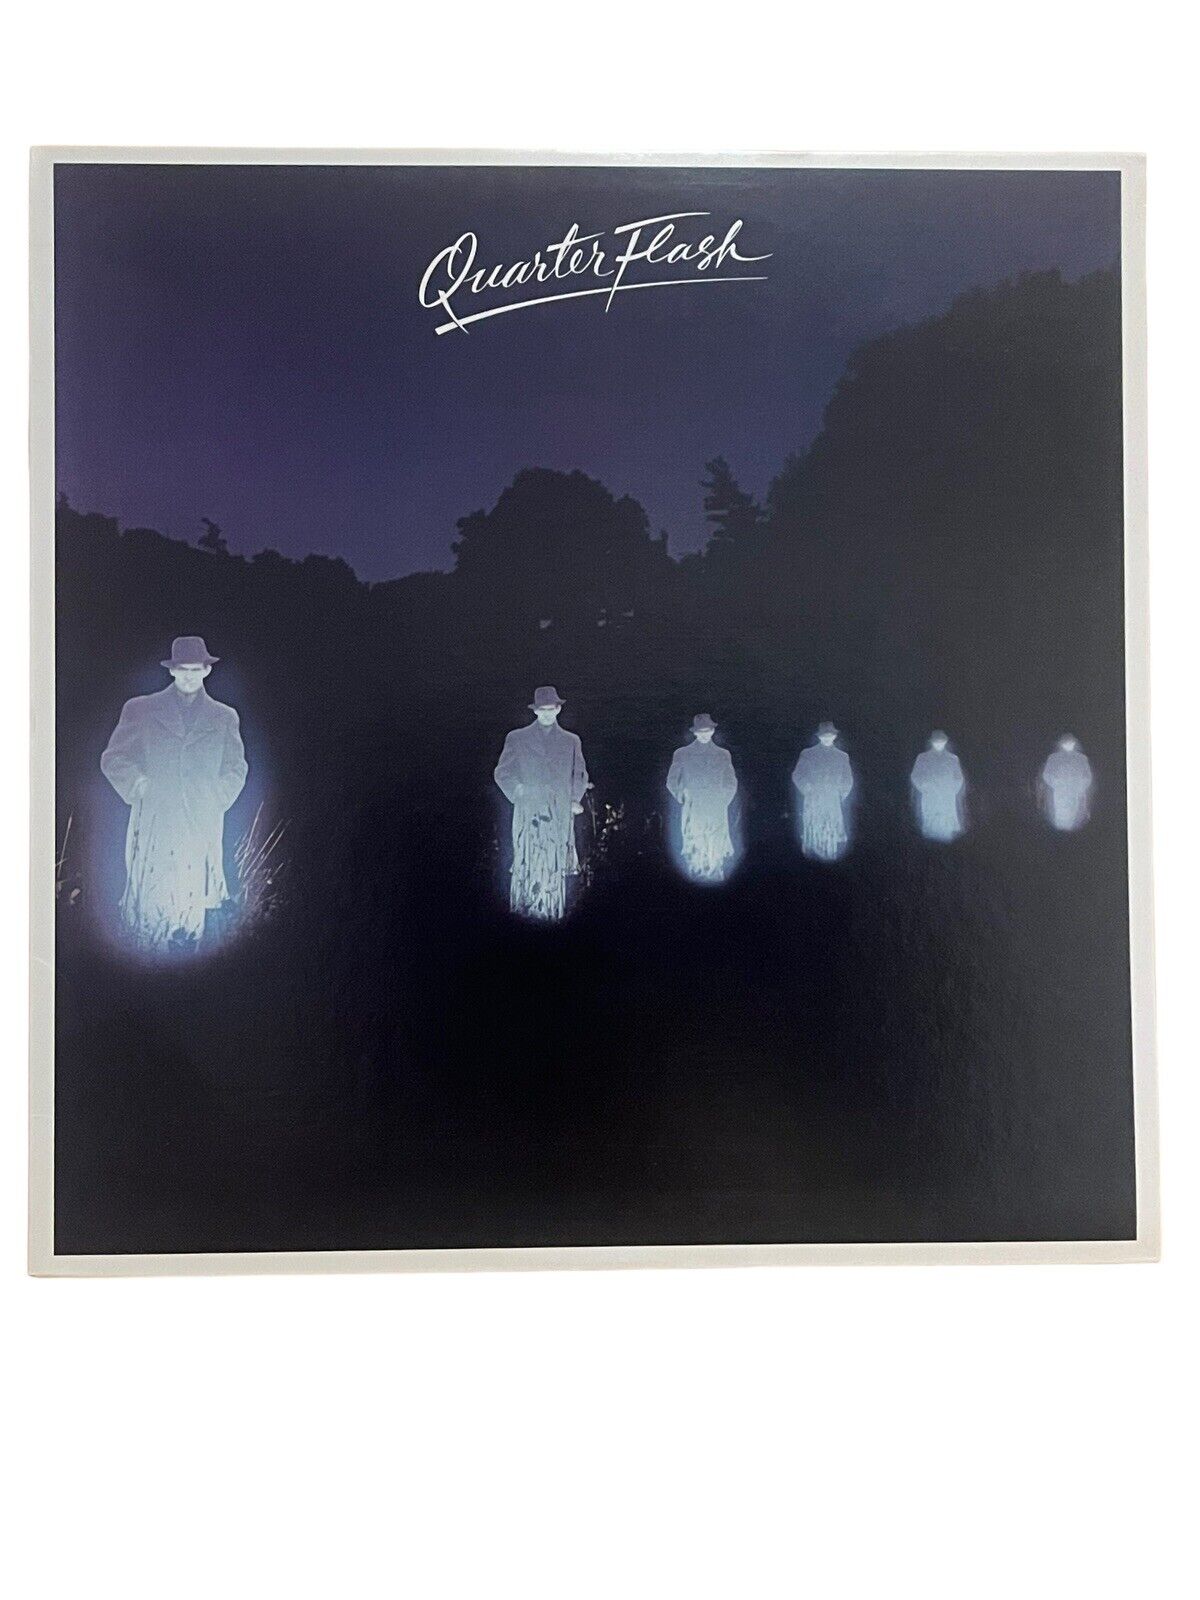 Quarterflash , Self titled, Geffen Records, GHS 2003, 1981 Free Shipping